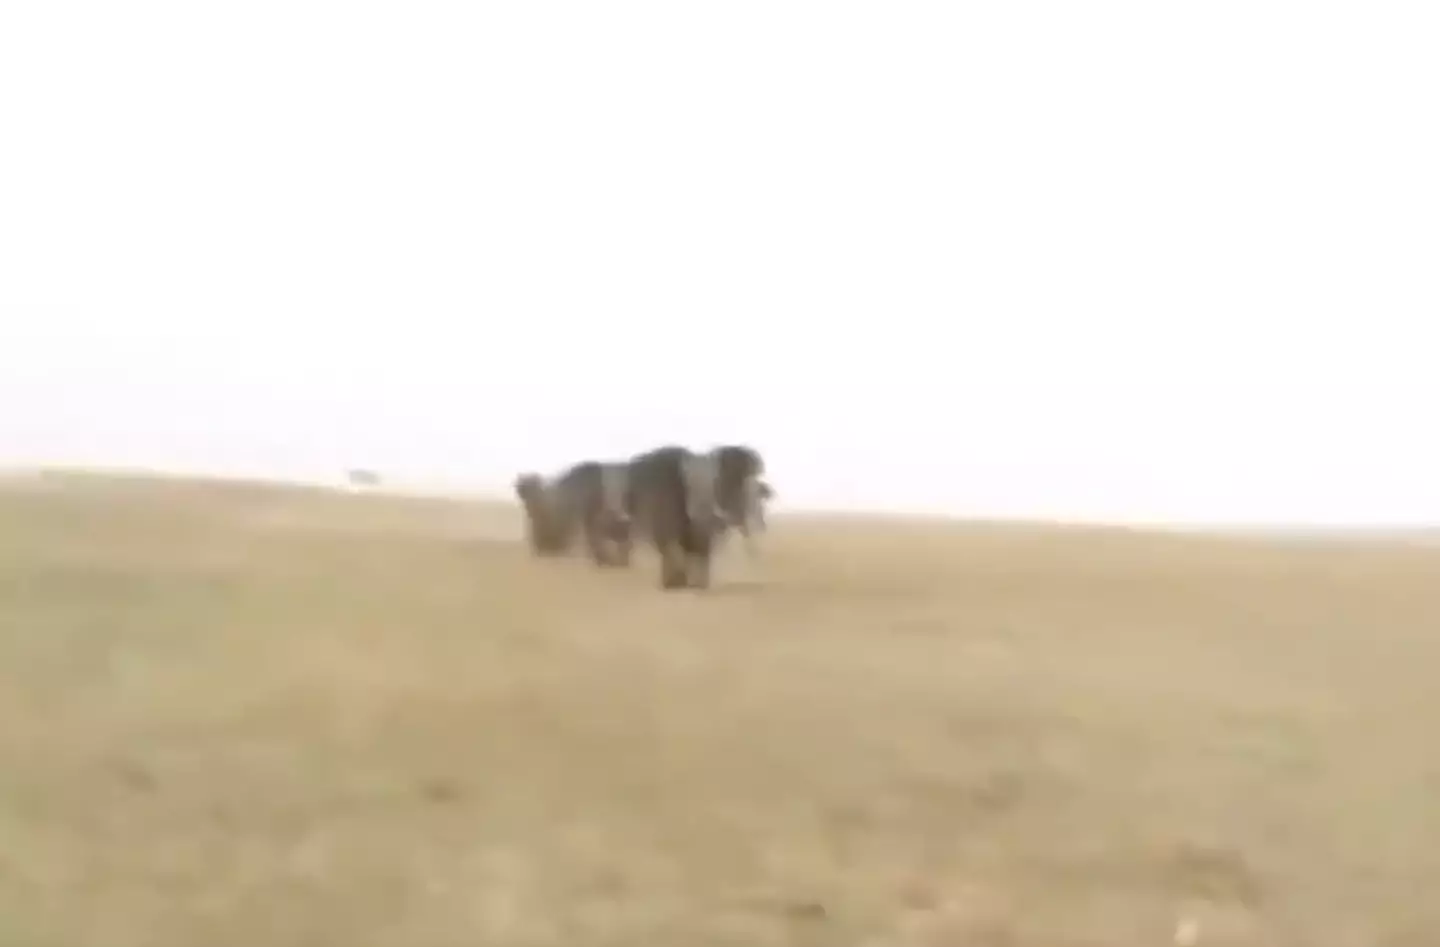 The hunters ran off as the elephants get ready to charge.